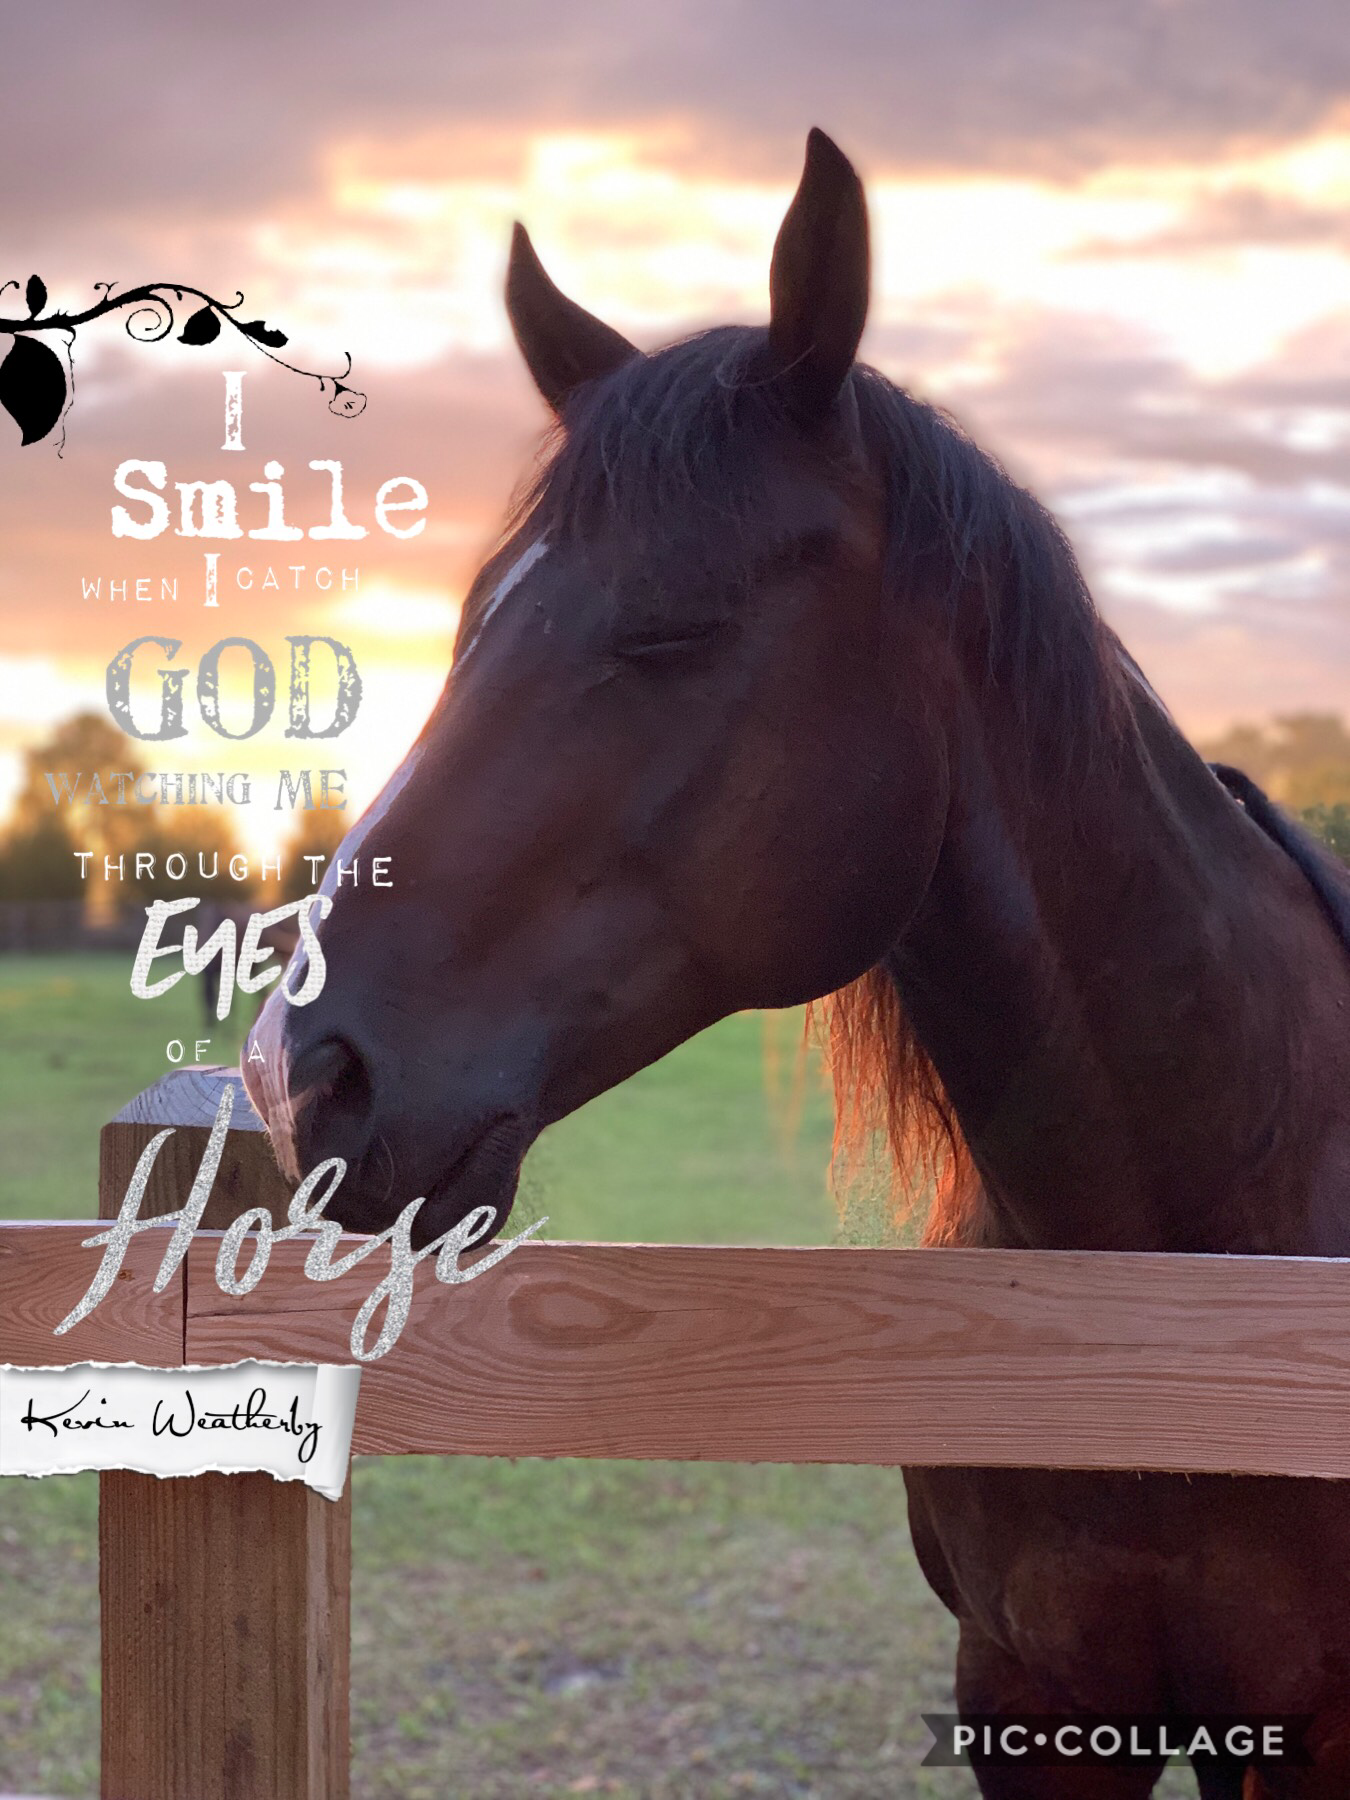 This is my horse Bailey 🤗 and I LOVE this quote 